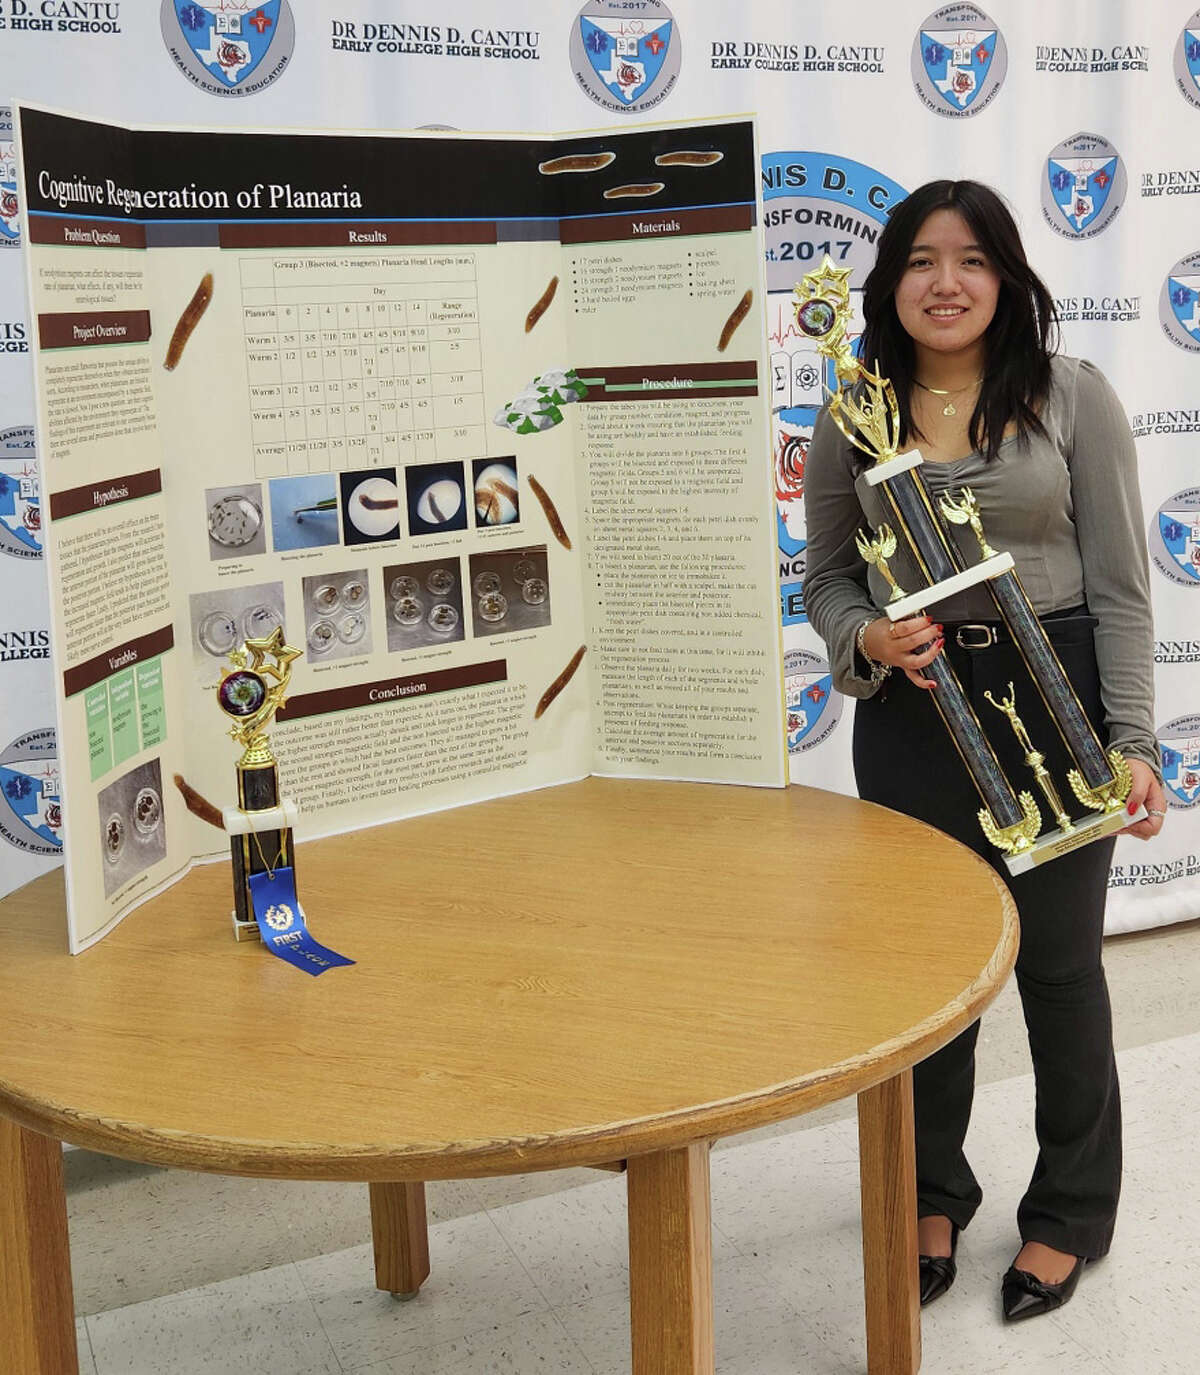 Dr. Dennis D. Cantu Early College High School’s sophomore Giselle Luna won first place in the Earth and Environmental Science Division with her project “Cognitive Regeneration of Planaria” and was declared the 2023 Grand Champion of the LISD Secondary Science Fair held recently at the LISD PAC. Luna will represent CECHS, Martin High School and Laredo ISD at the International Science and Engineering Fair in Dallas, Texas on May 13-18, 2023.